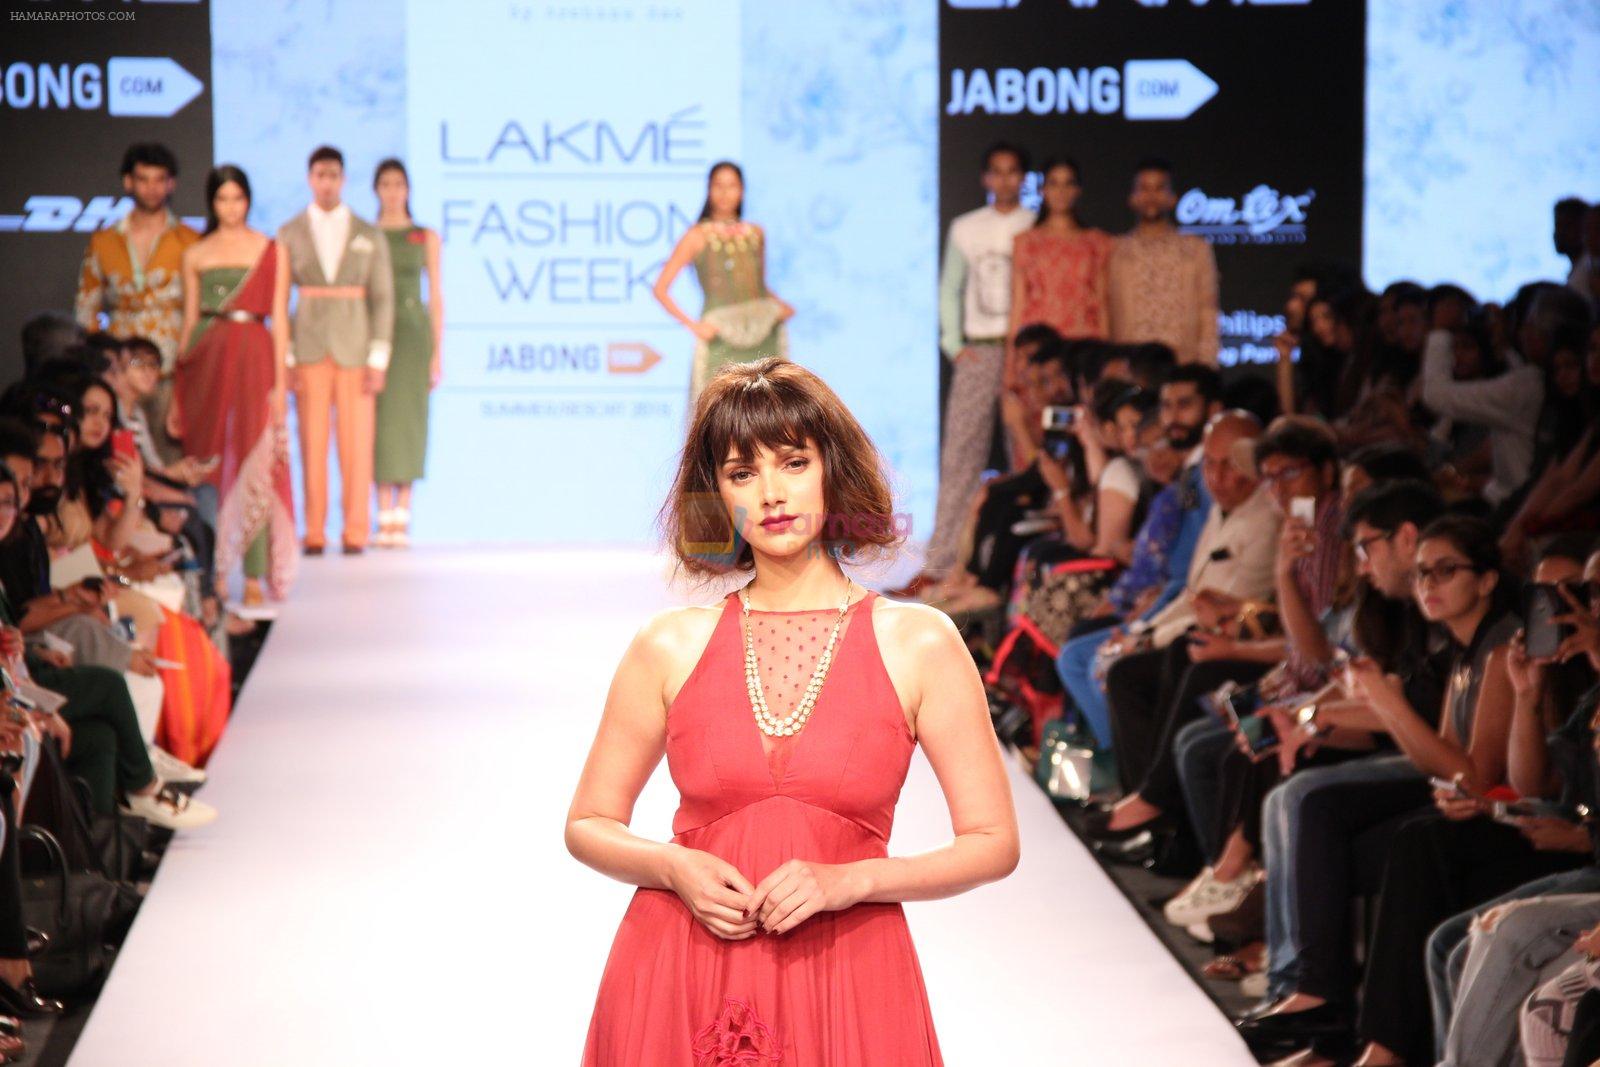 Aditi Rao Hydari walks the ramp for Frou Frou at Lakme Fashion Week 2015 Day 1 on 18th March 2015